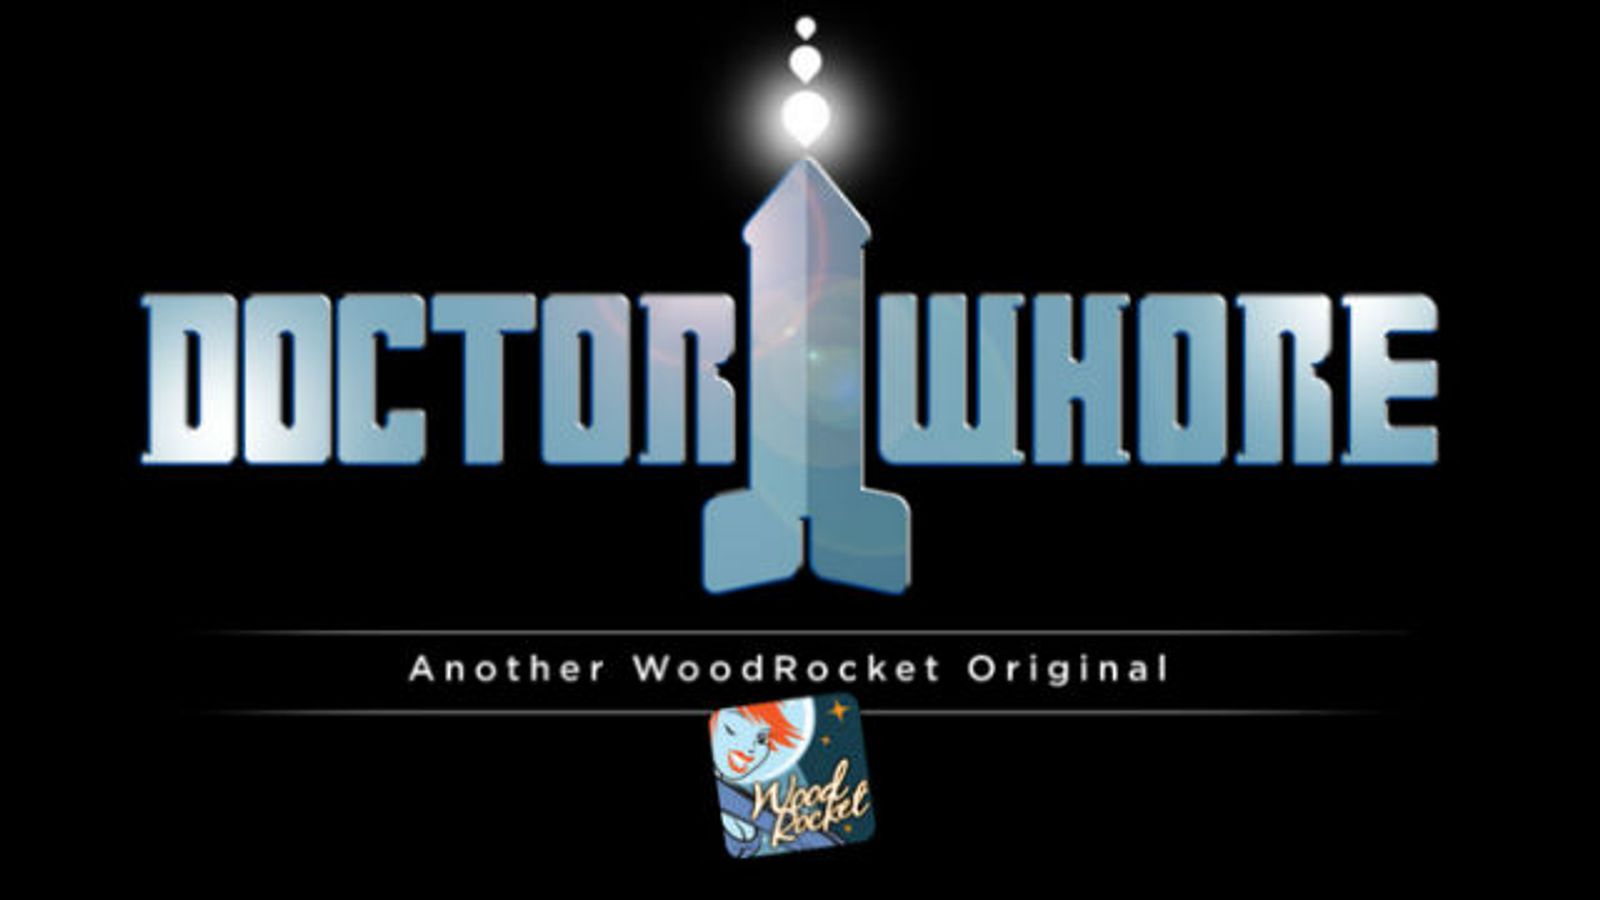 'Doctor Who' Parody is Now Free to Watch on WoodRocket.com